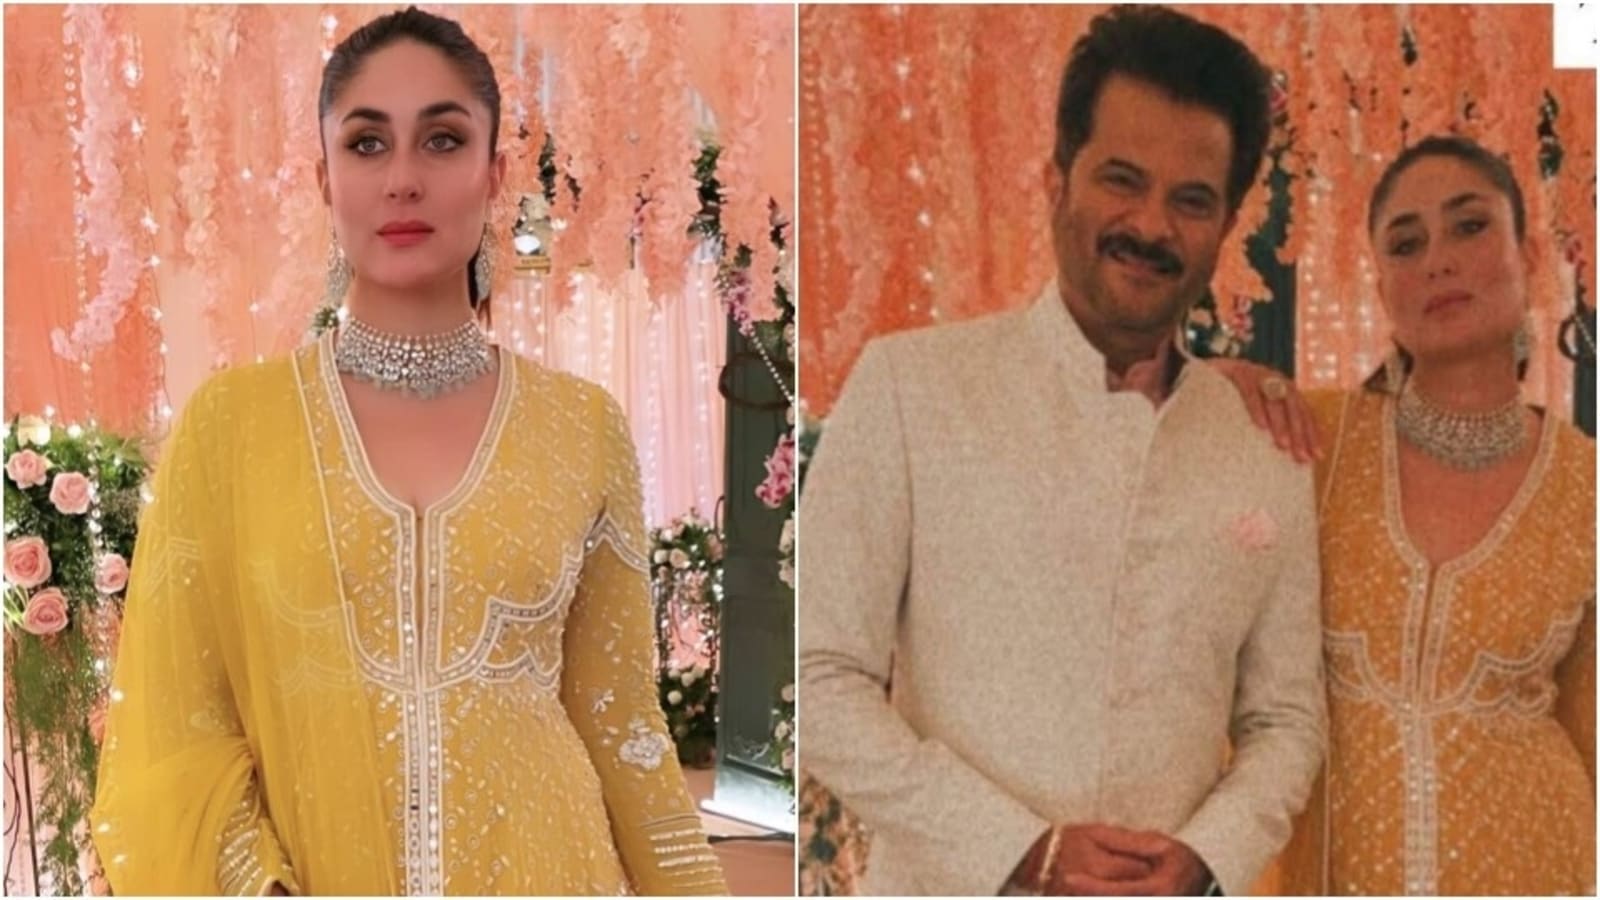 Kareena Kapoor shoots with Anil Kapoor in ₹1 lakh anarkali set, see pics  and video | Fashion Trends - Hindustan Times